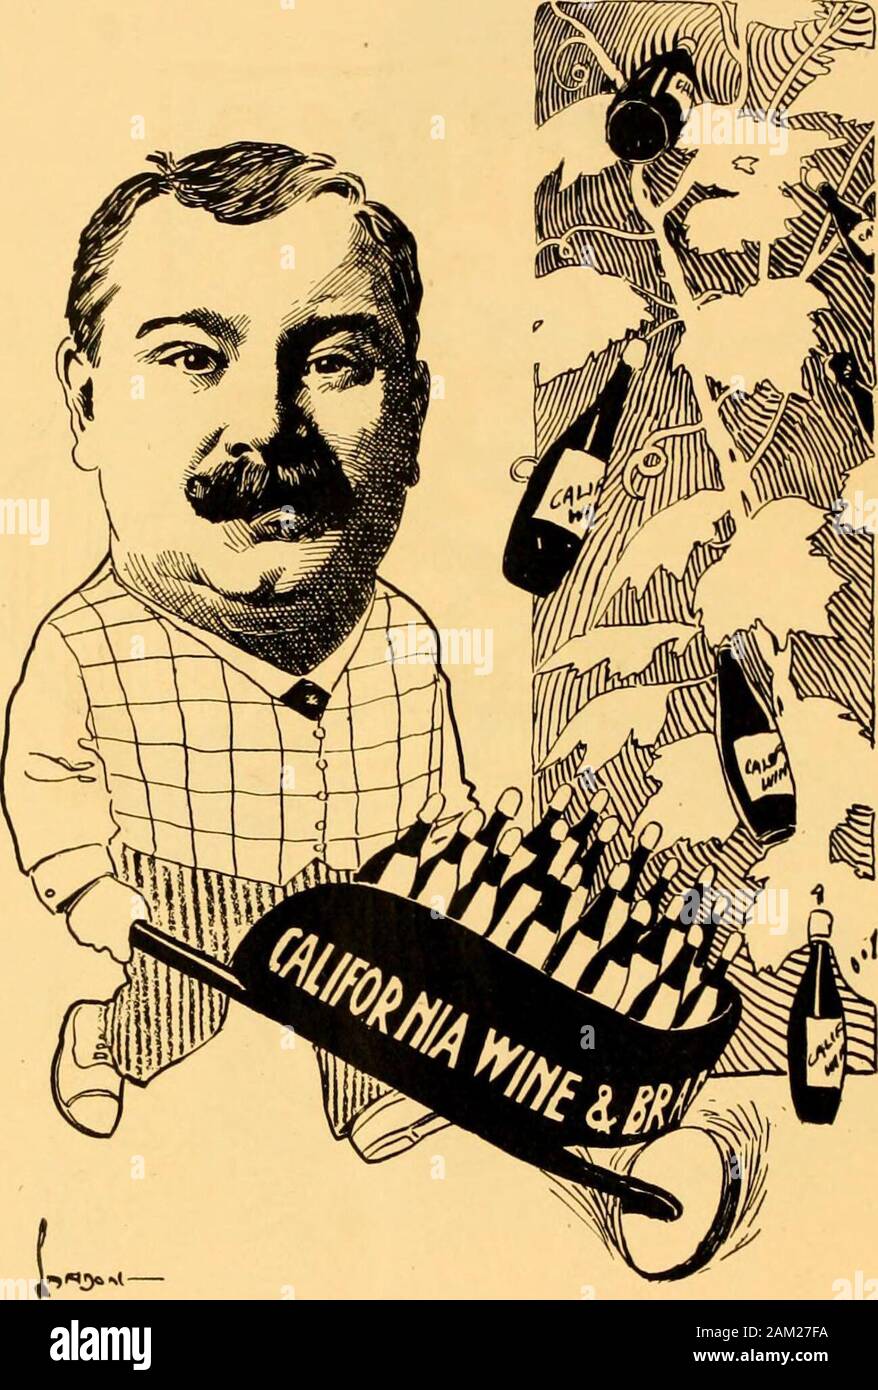 Clevelanders 'as we see 'em;' a gallery of pen sketches in black and white . ^^--i^^ L. W. Prior Denison, Prior and Company 261. Frank H. Trope Dealer in Caliiomia Wines and Brandies262 Stock Photo